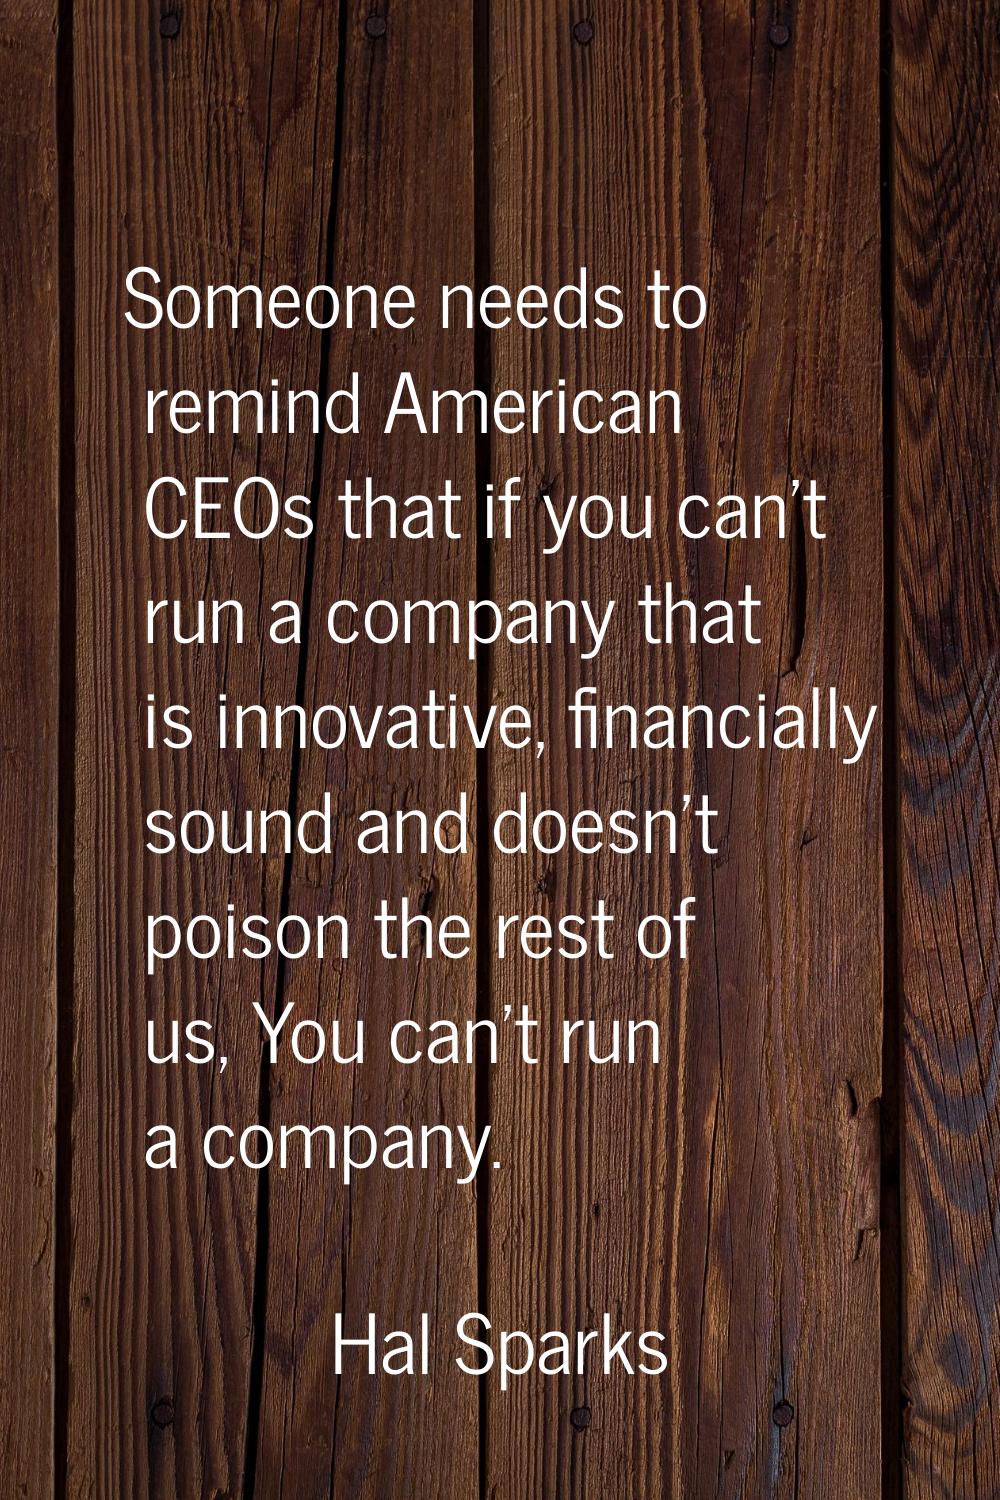 Someone needs to remind American CEOs that if you can't run a company that is innovative, financial